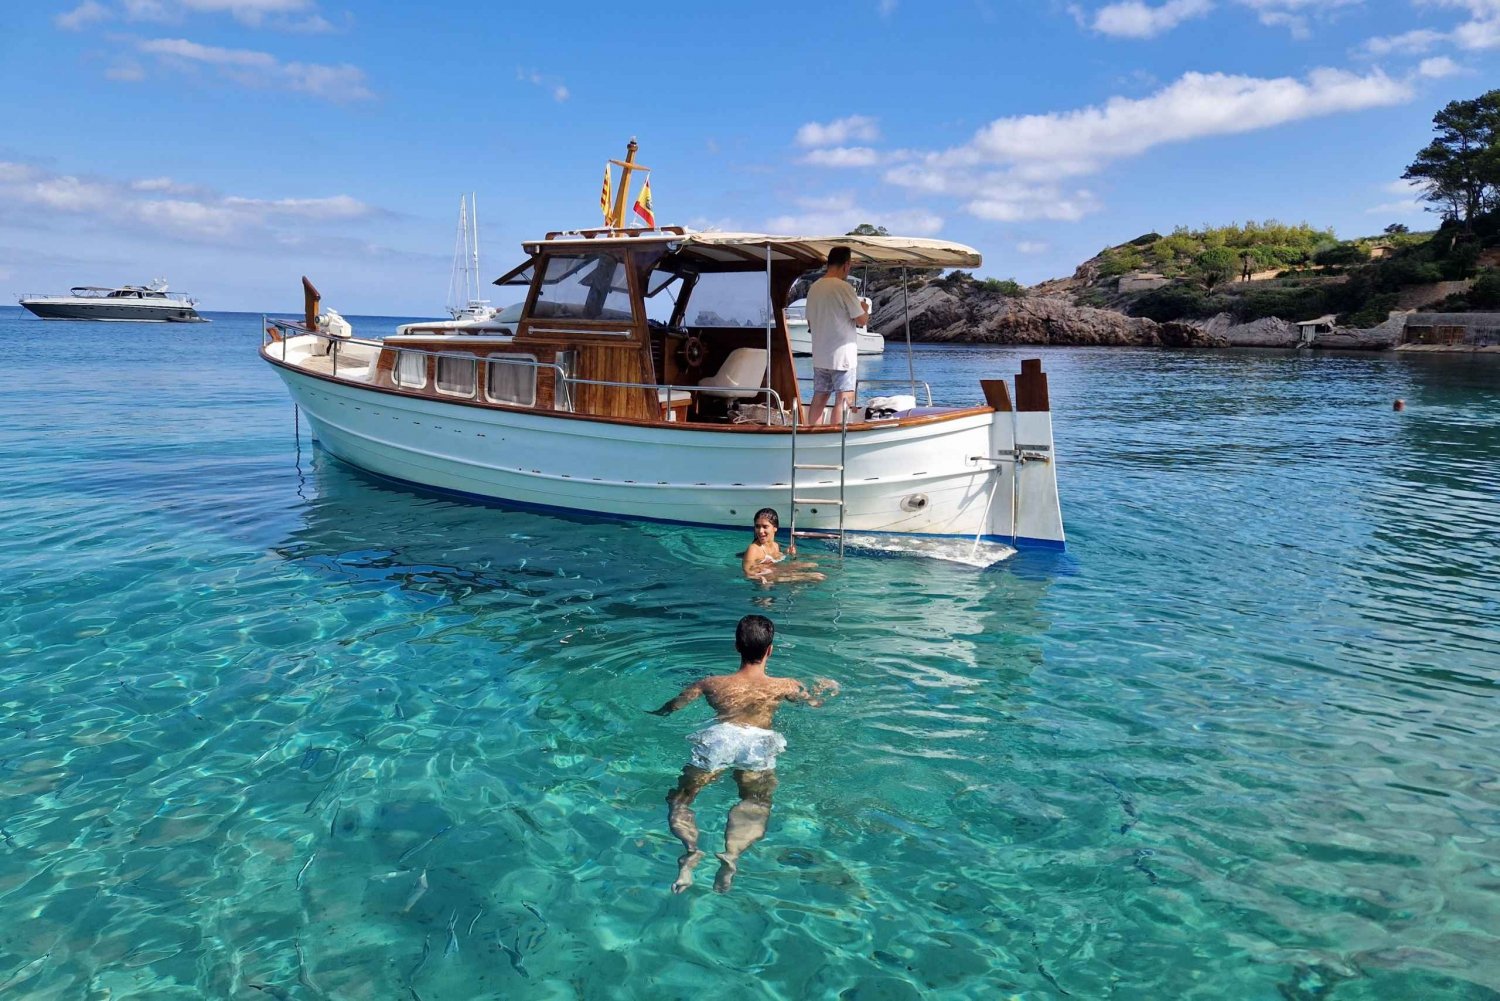 Ibiza: One day excursion on a traditional Ibiza boat (Lunes)